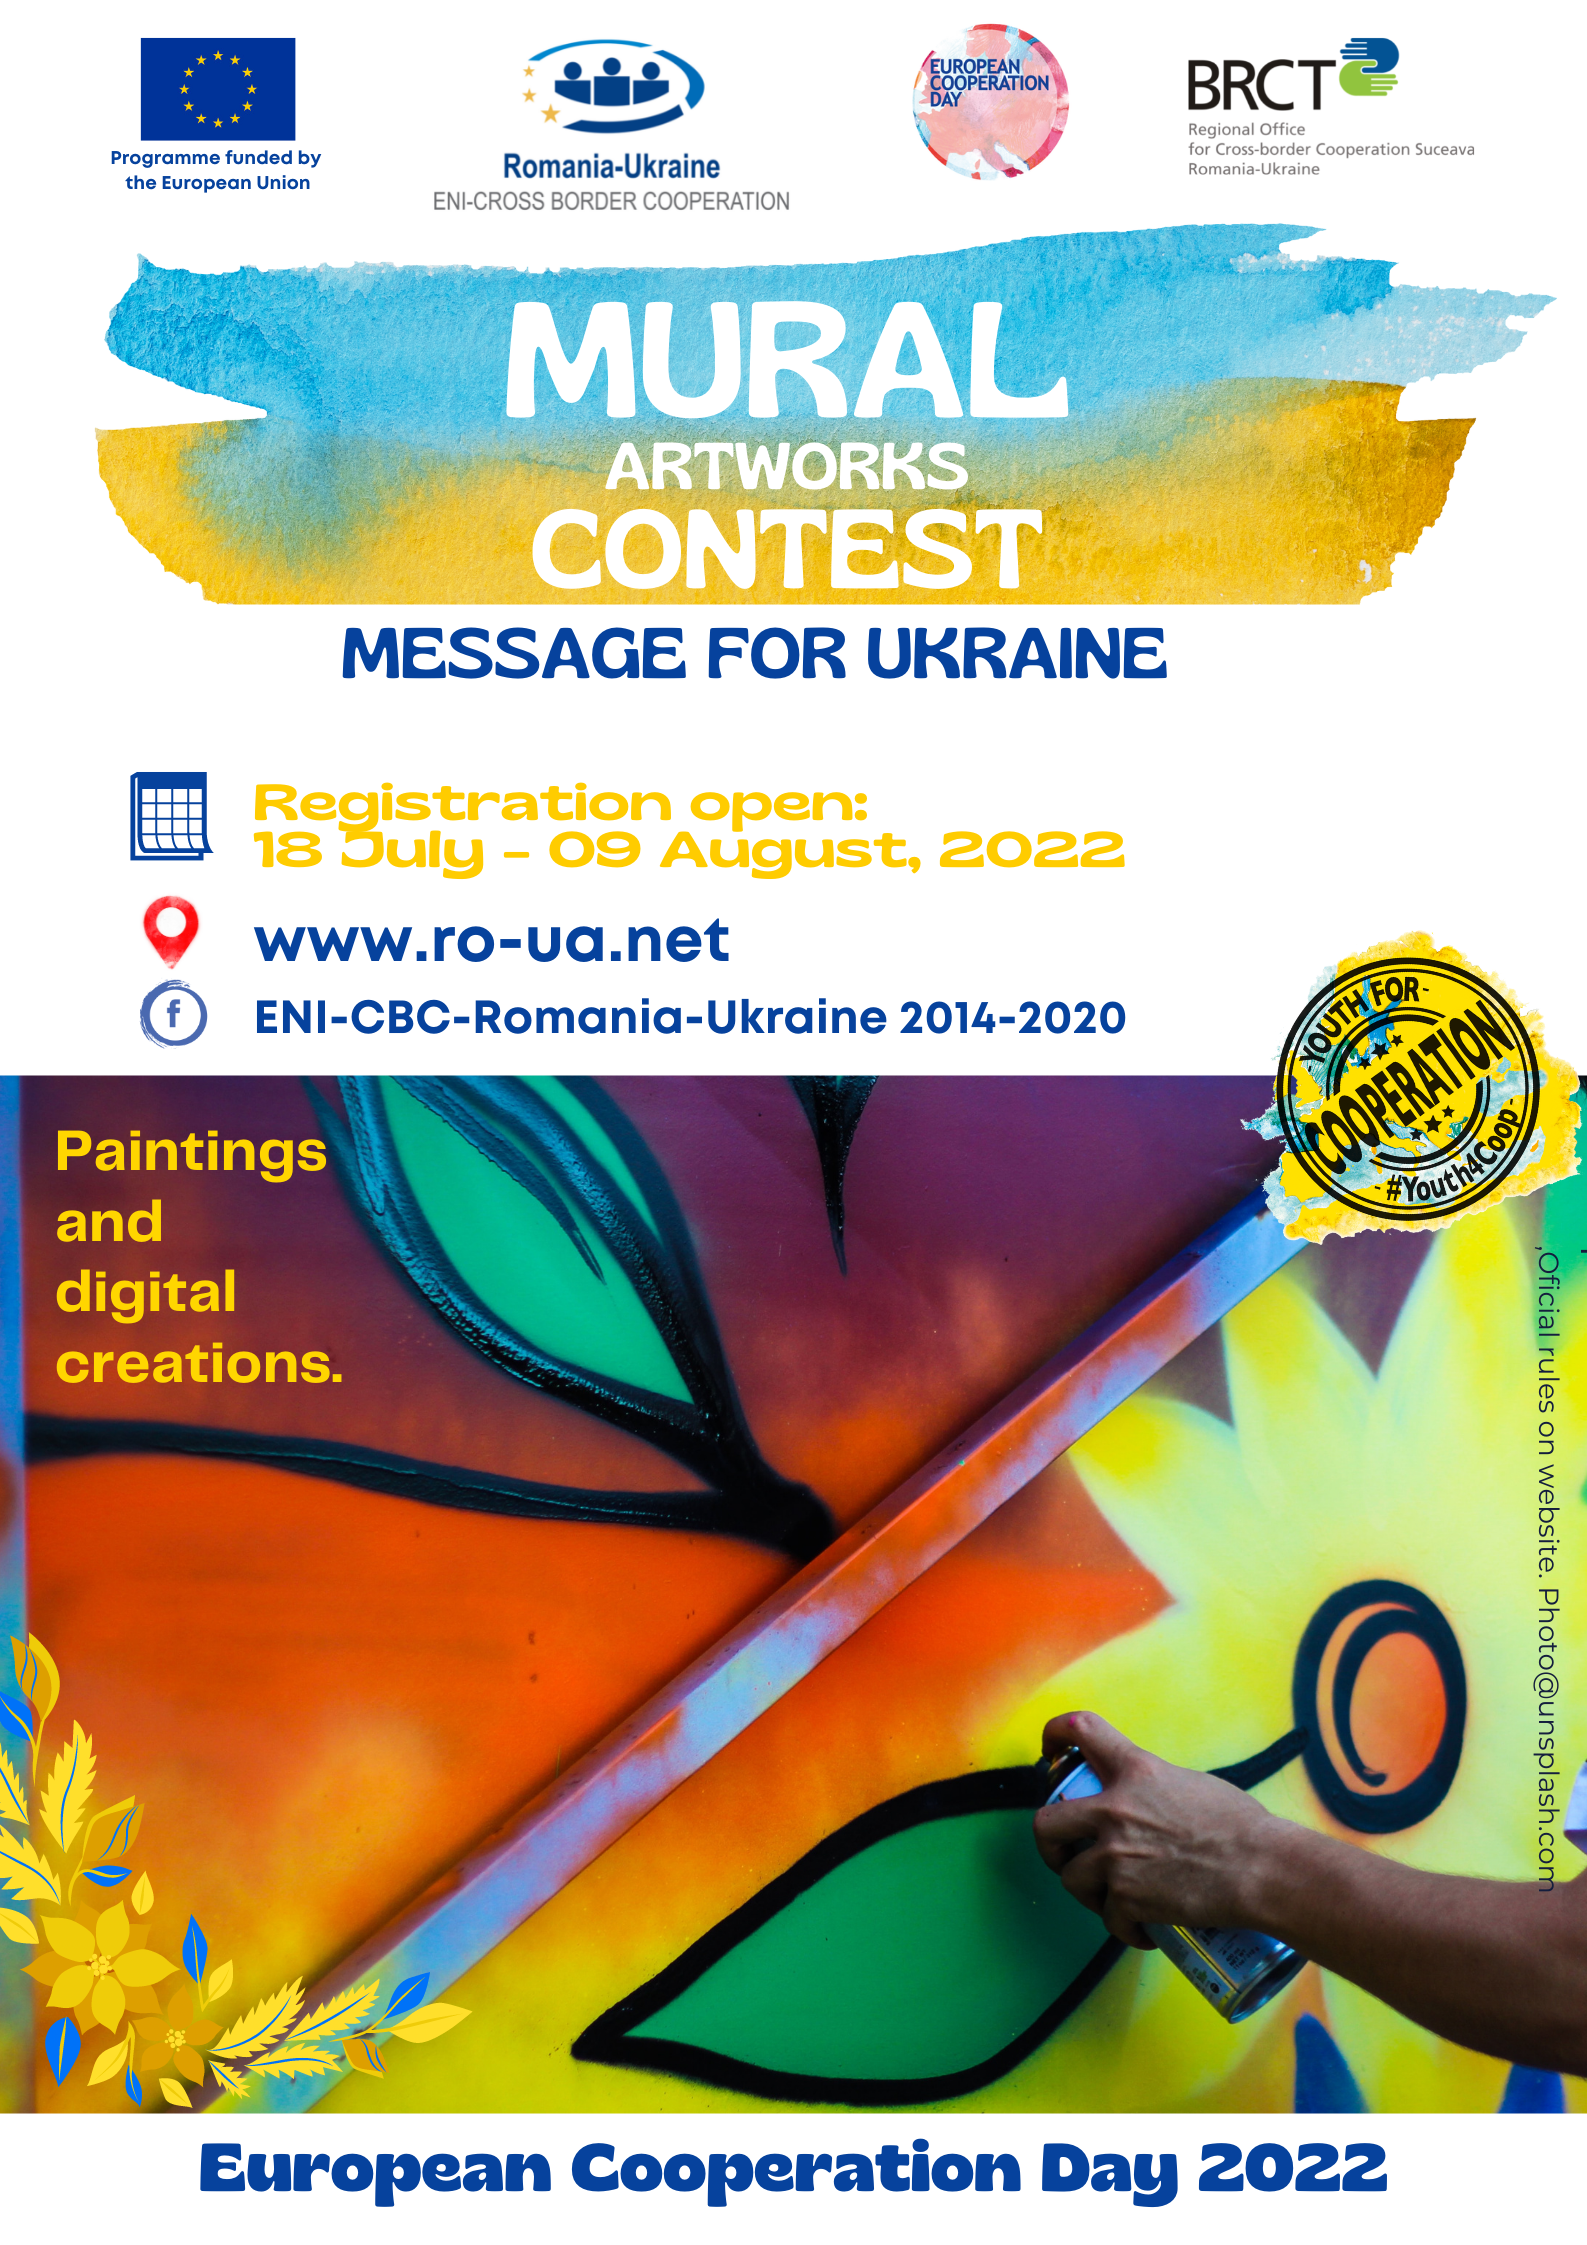 "Message for Ukraine" - COMPETITION of artworks for MURAL